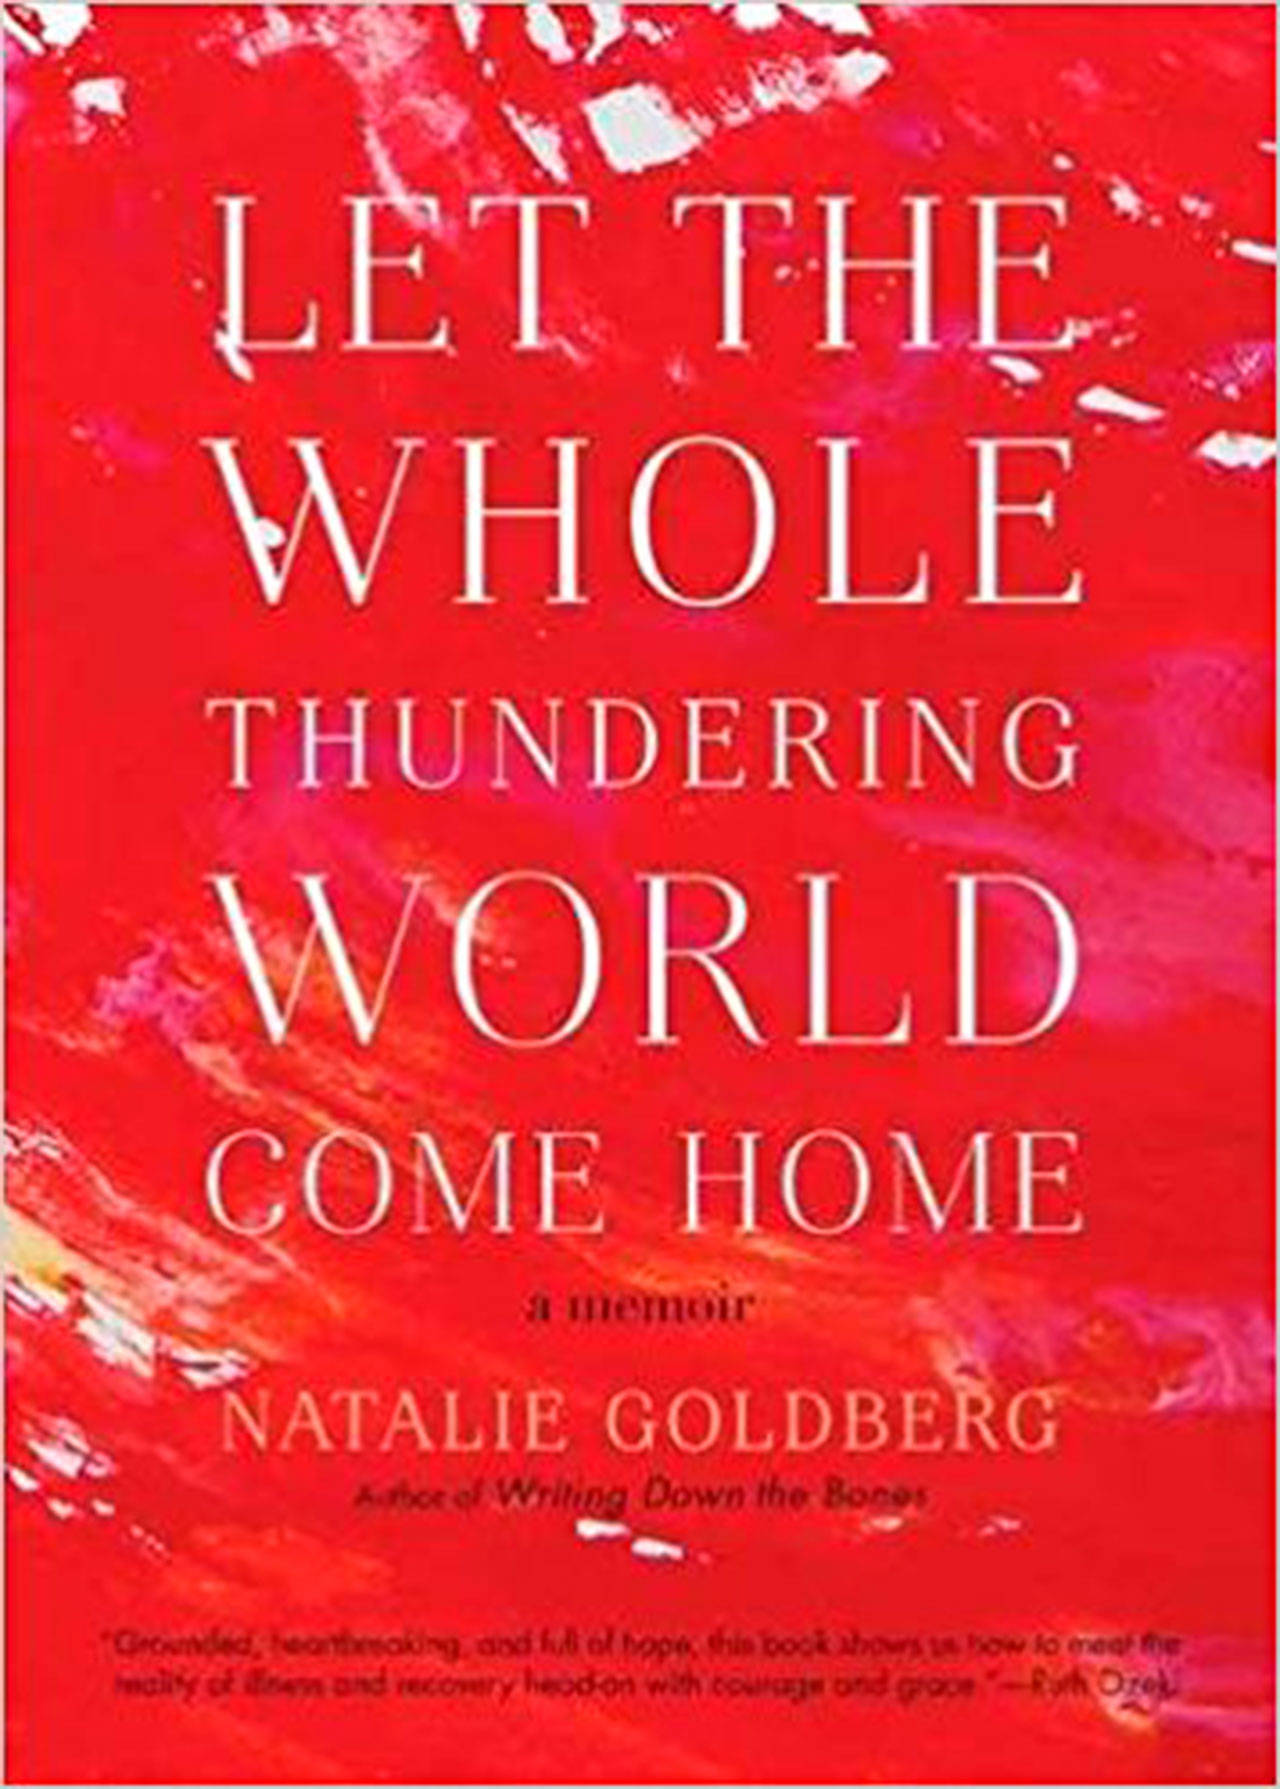 Image courtesy of Eagle Harbor Book Company | Natalie Golderg will visit Eagle Harbor Book Company in downtown Winslow to discuss her new memoir “Let the Whole Thundering World Come Home,” at 6:30 p.m. Tuesday, June 19.